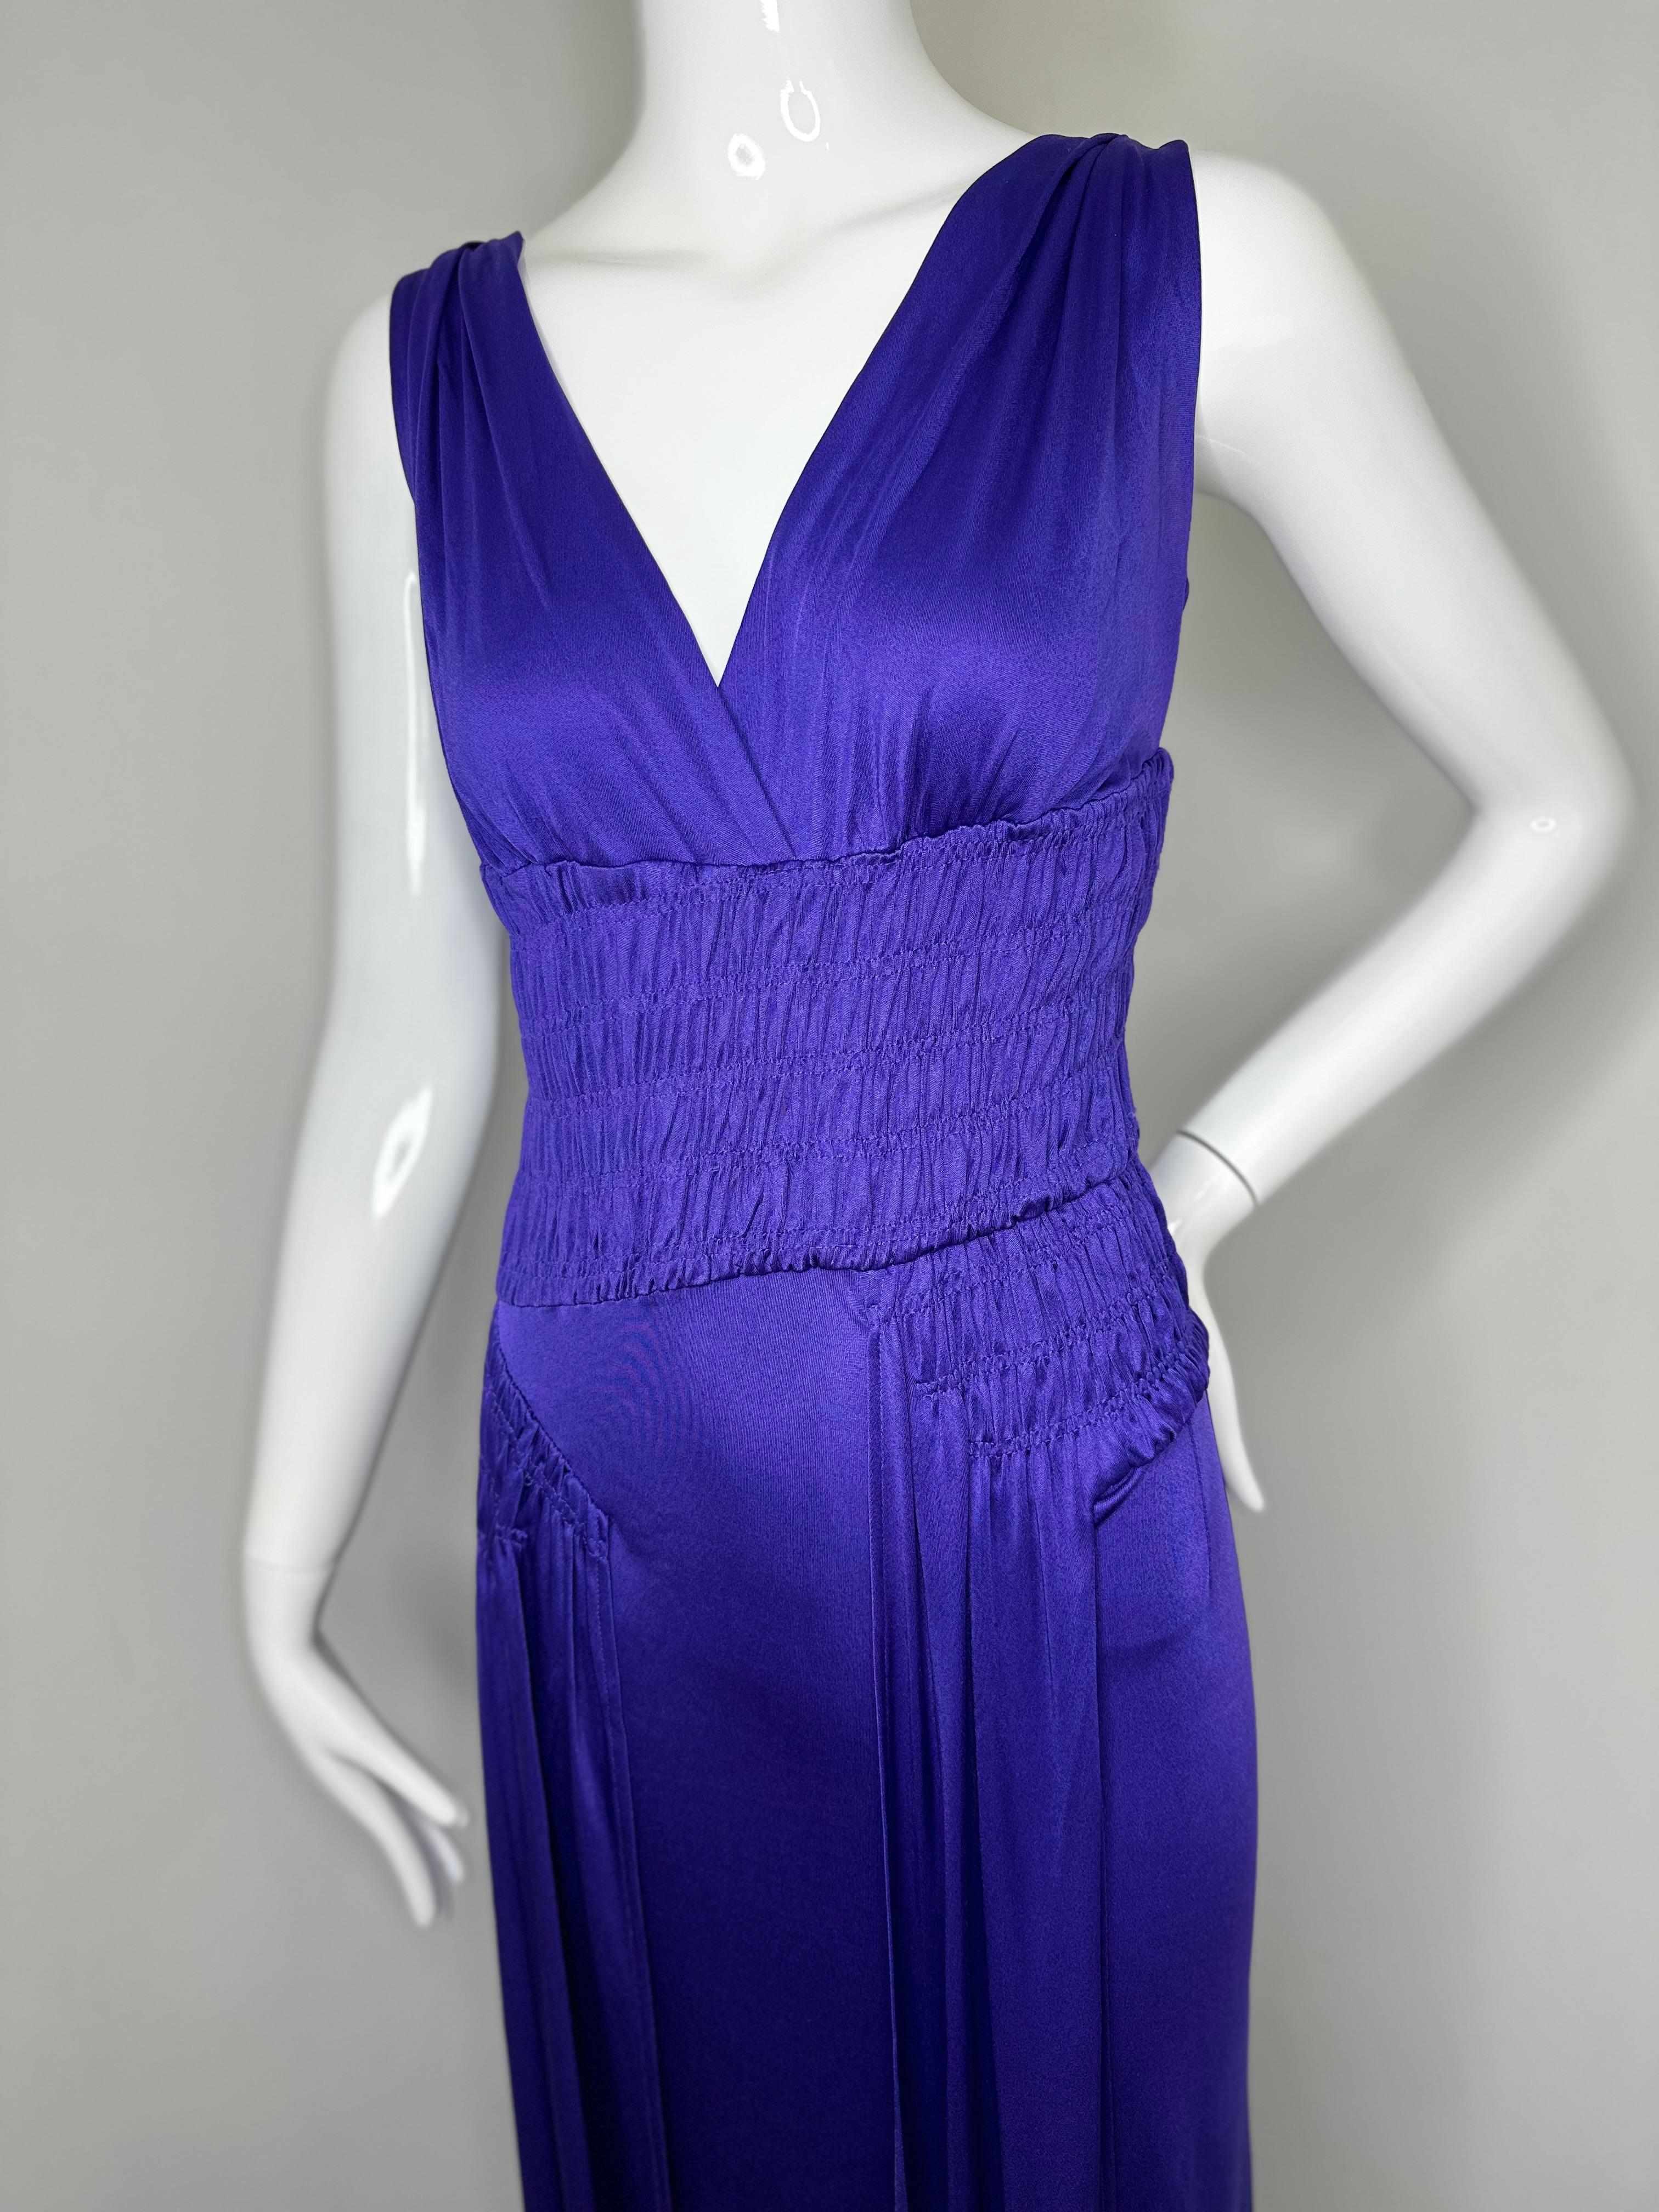 Christian Dior purple gown For Sale 1